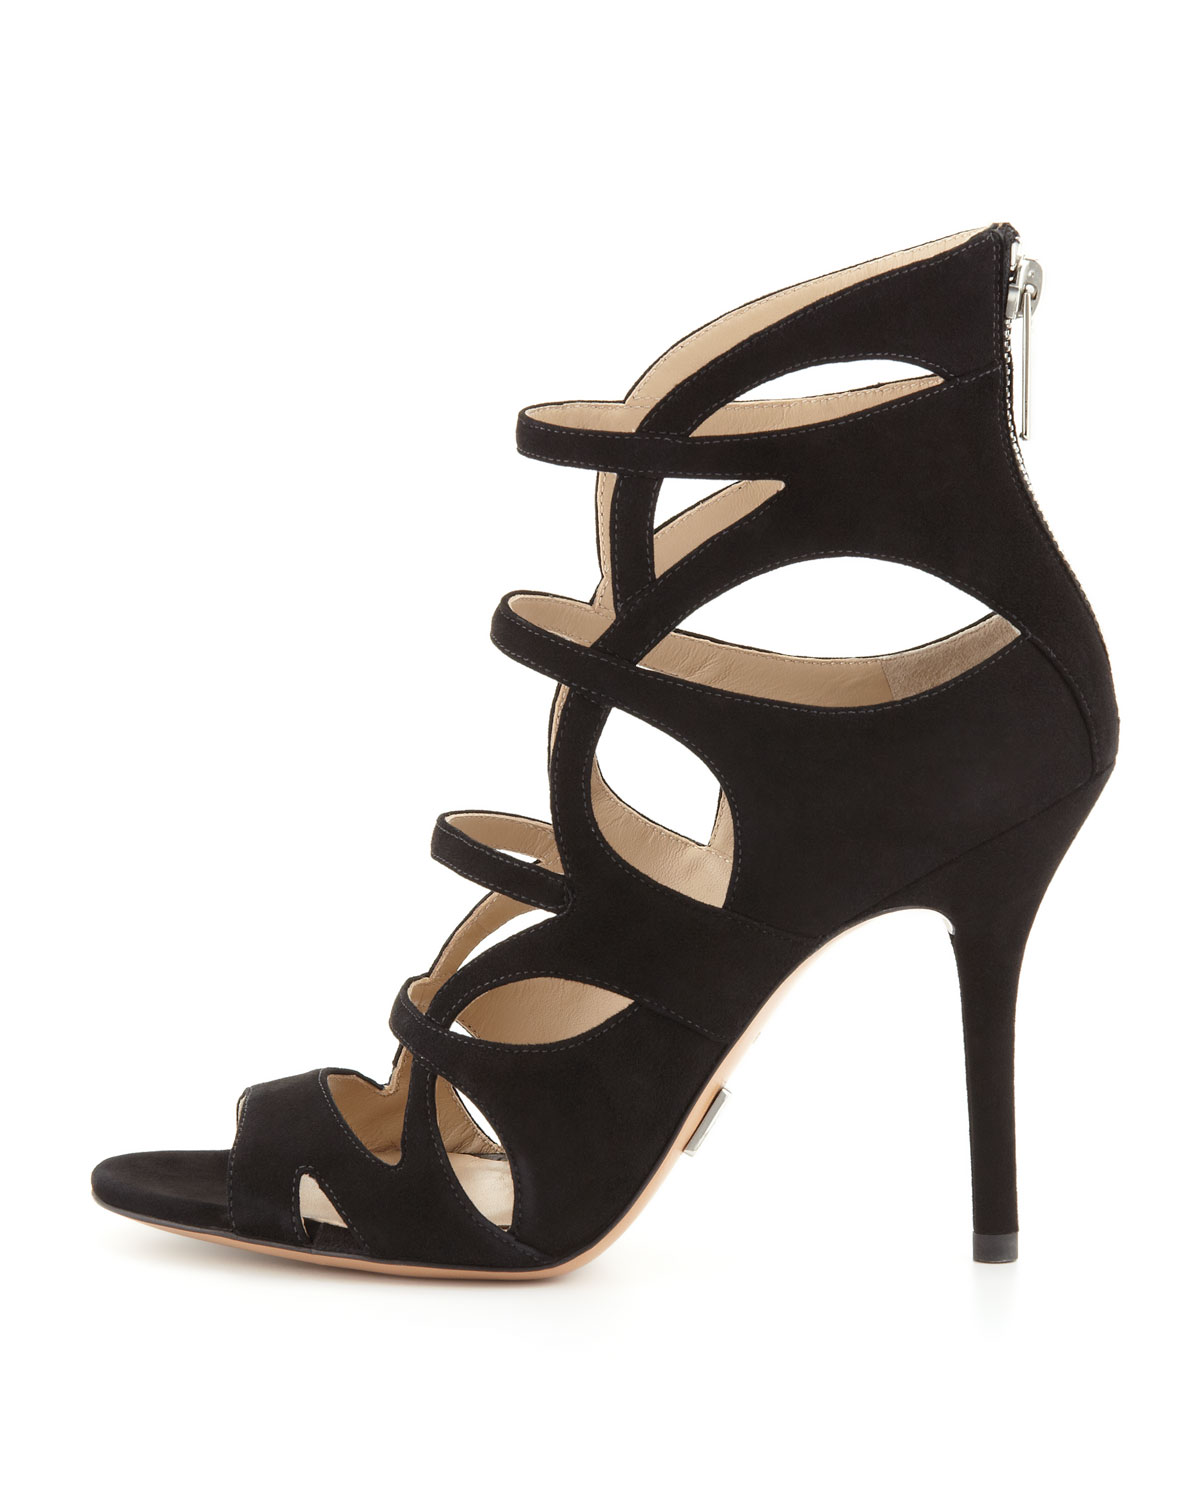 Lyst - Michael Kors Casey Suede Strappy Sandal in Black